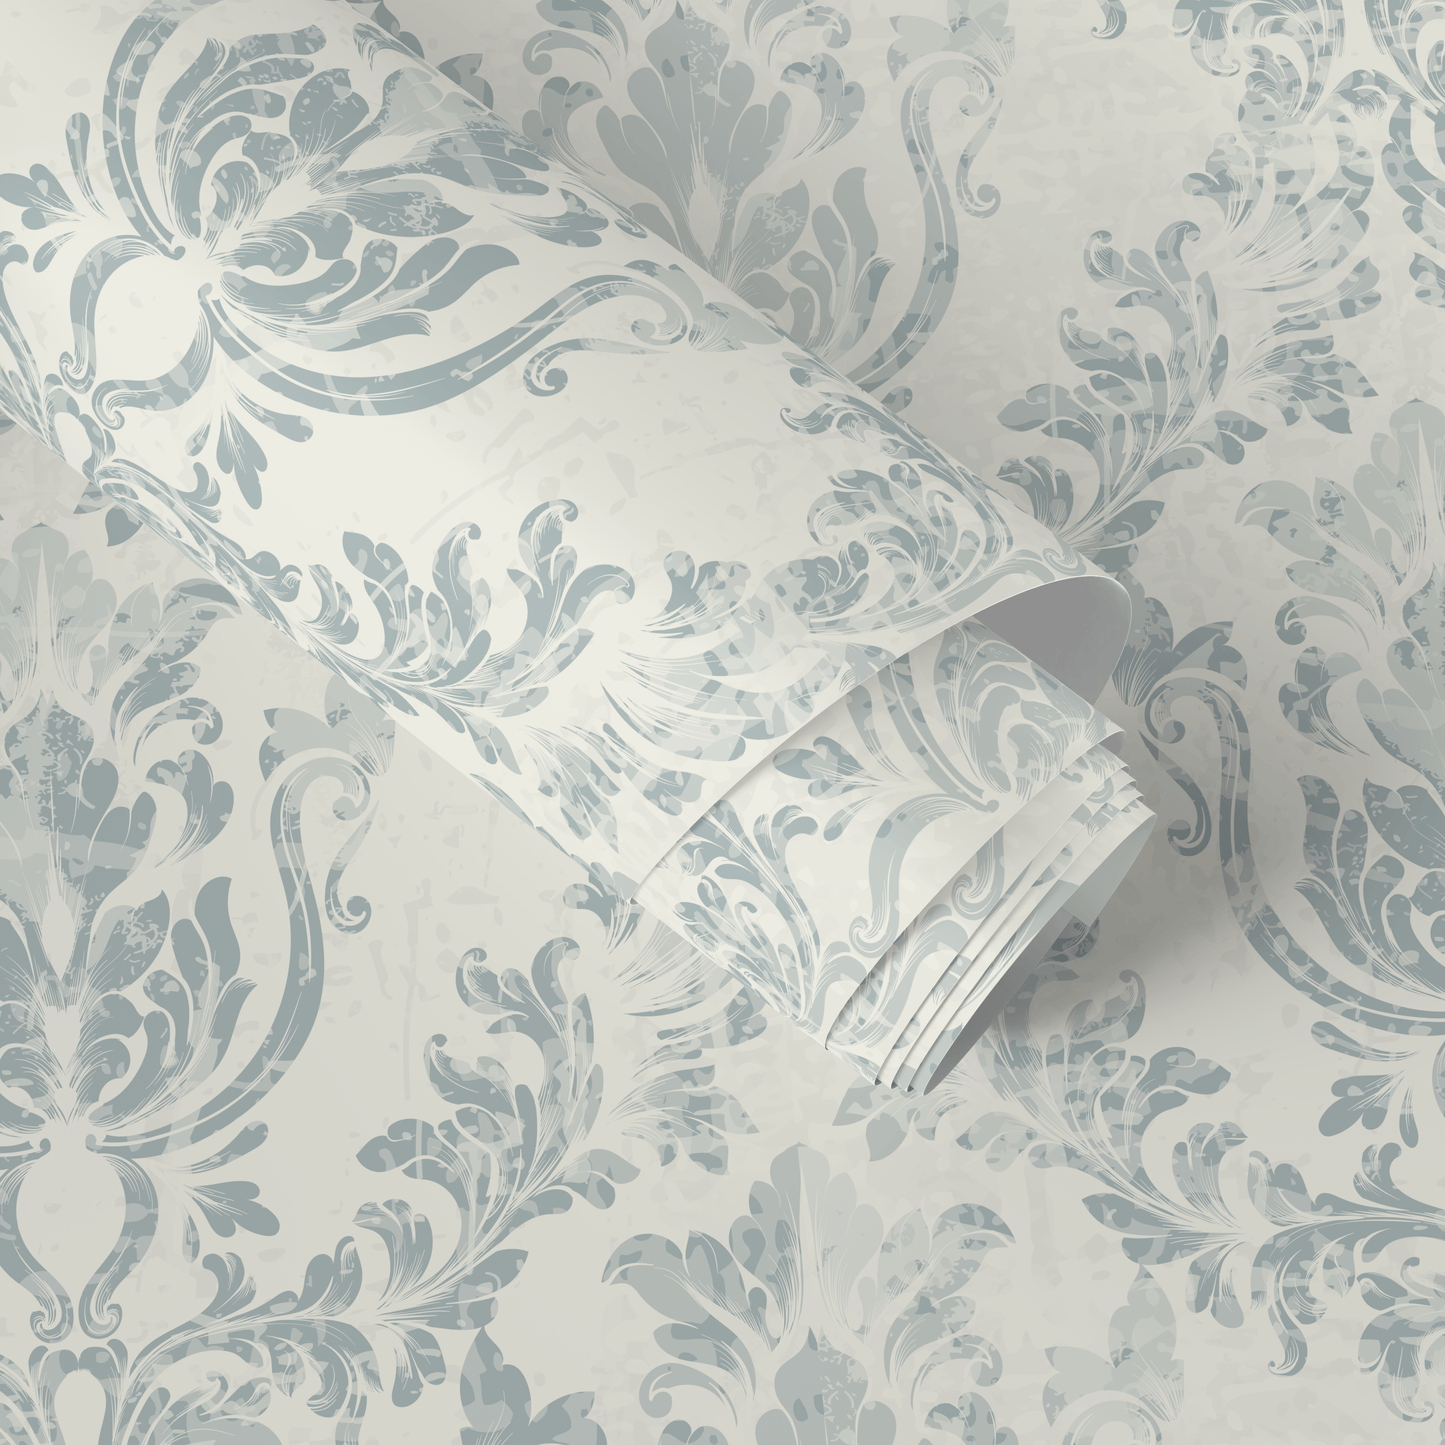 Blue Vintage Damask Wallpaper Peel and Stick and Traditional Wallpaper - A650